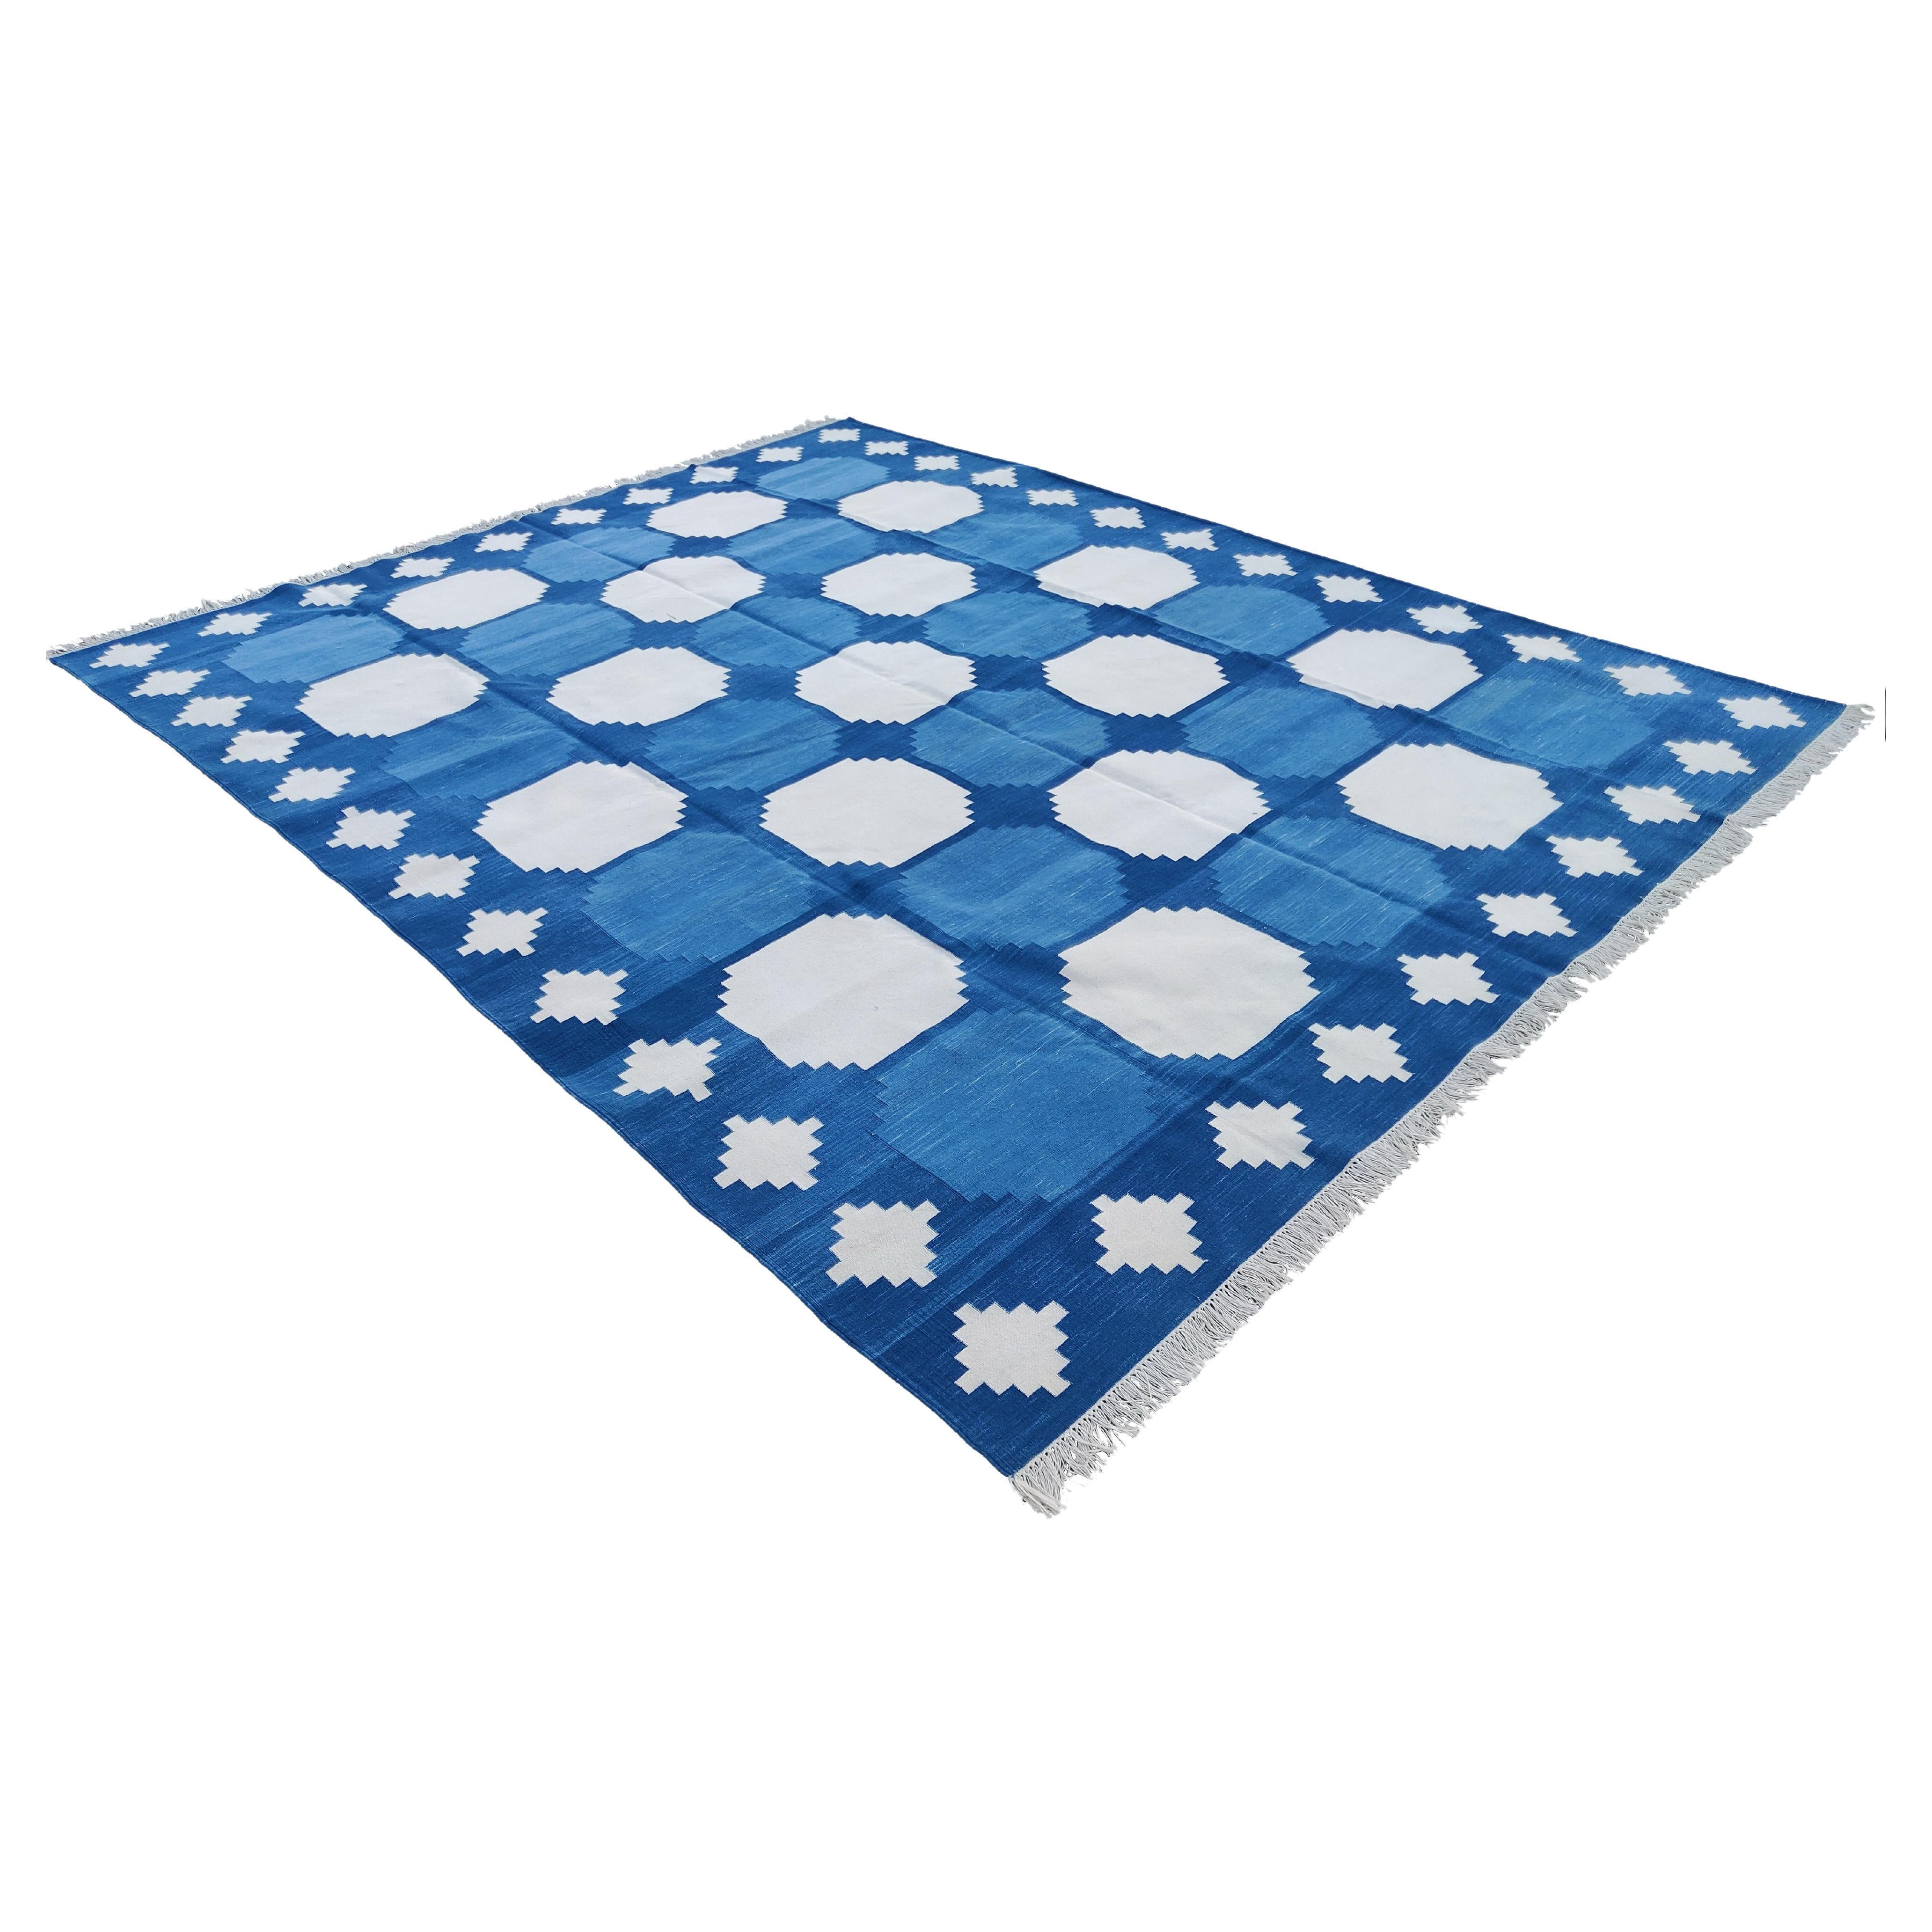 Handmade Cotton Area Flat Weave Rug, Blue, White Geometric Indian Dhurrie-8x10 For Sale